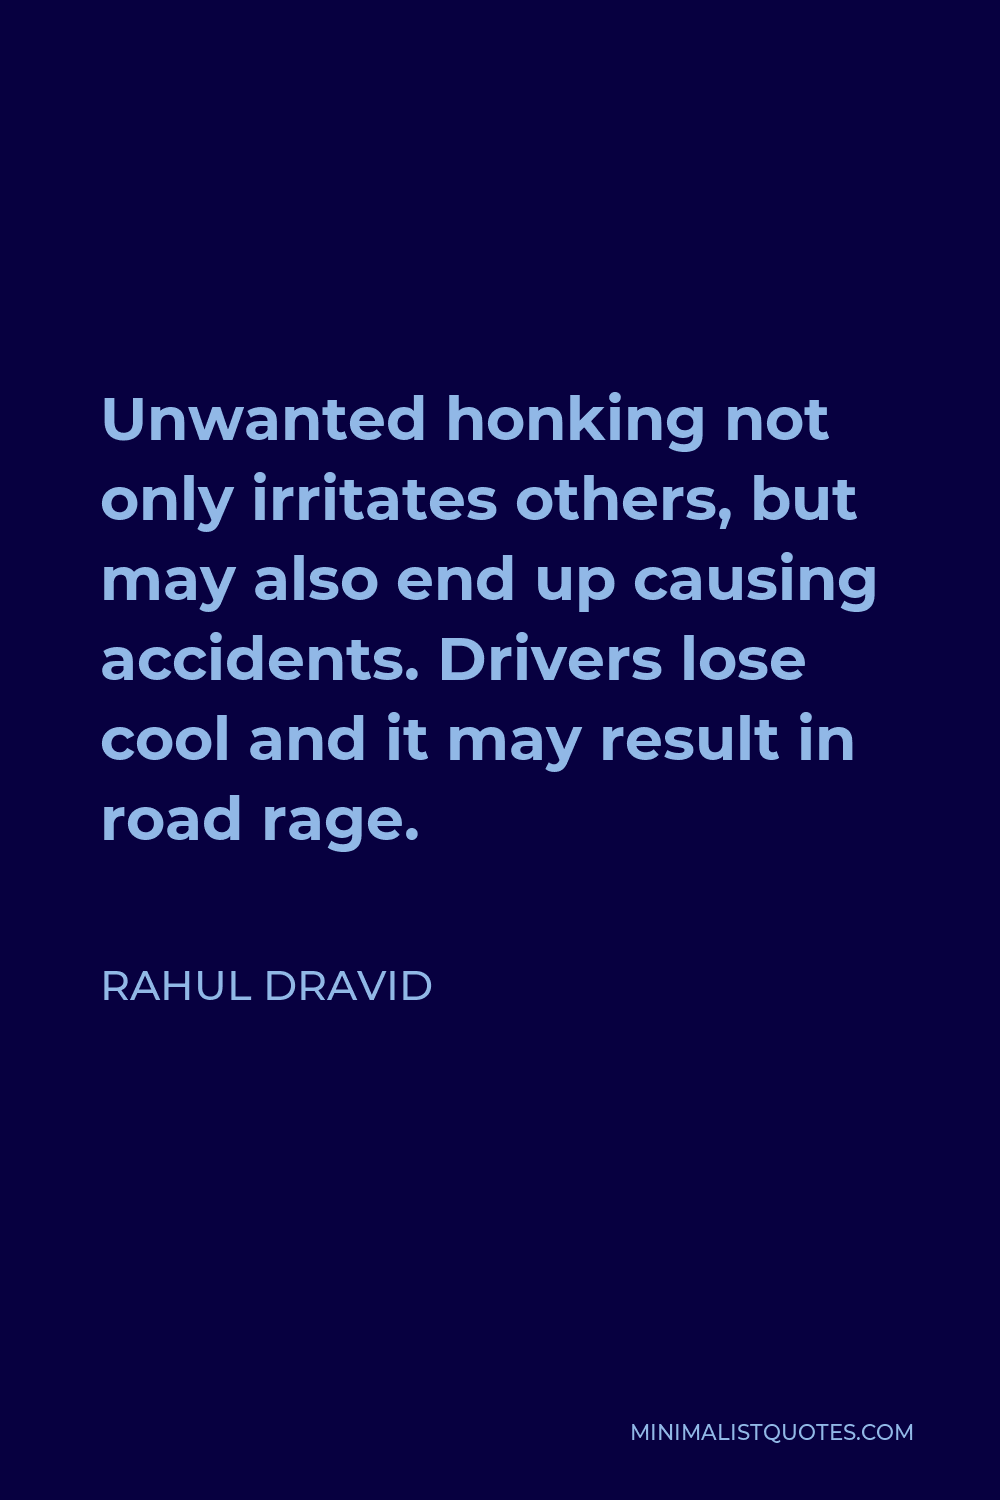 Rahul Dravid Quote - Unwanted honking not only irritates others, but may also end up causing accidents. Drivers lose cool and it may result in road rage.